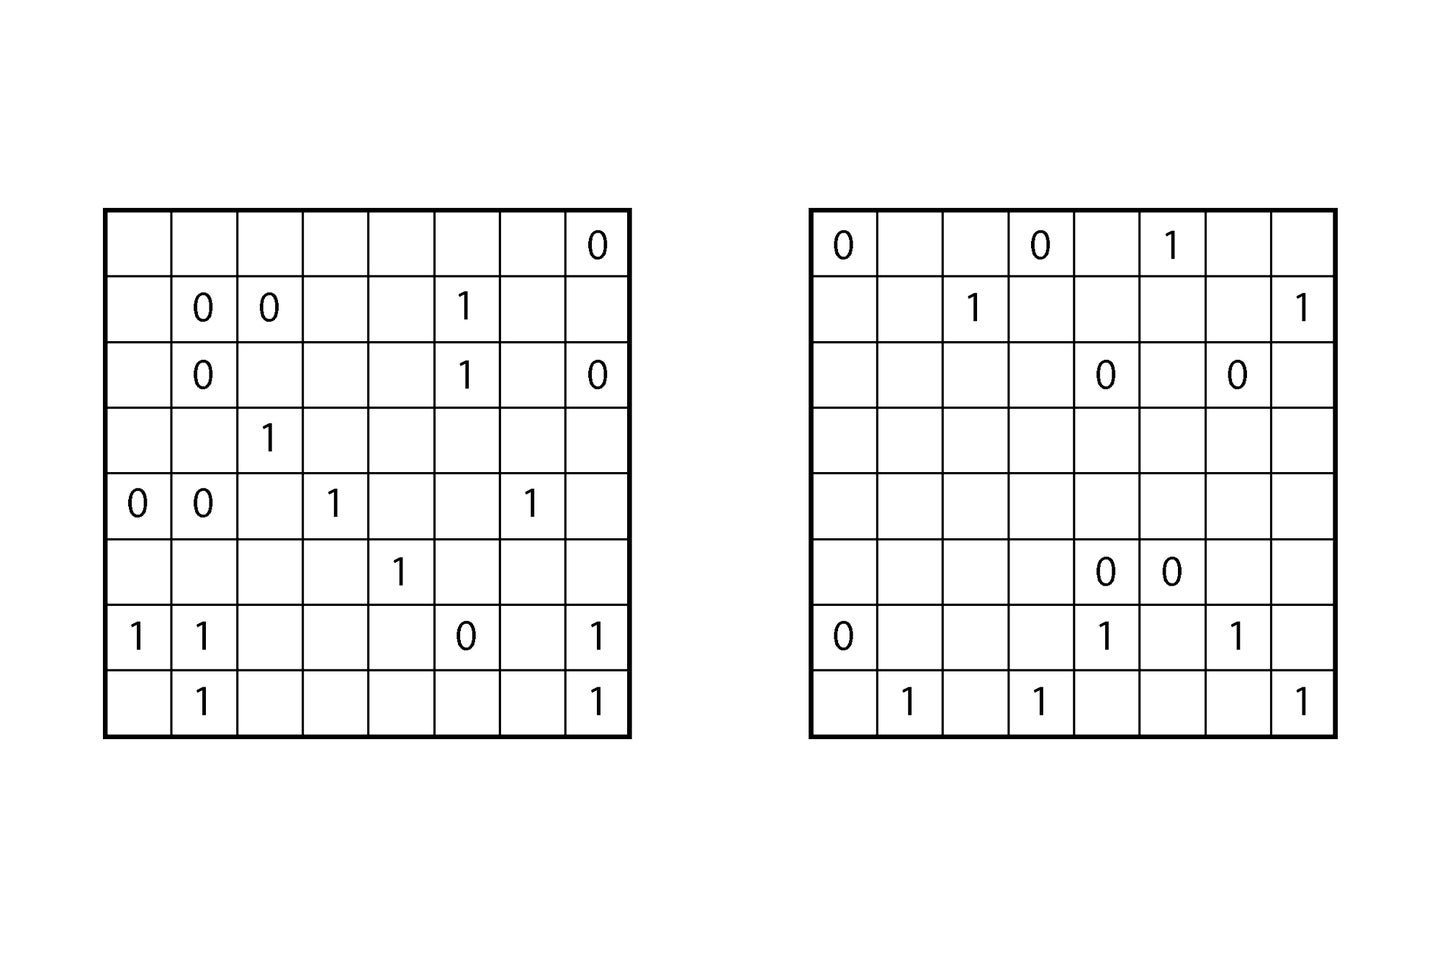 These sudoku puzzles only use 1s and 0s. Can you crack them?